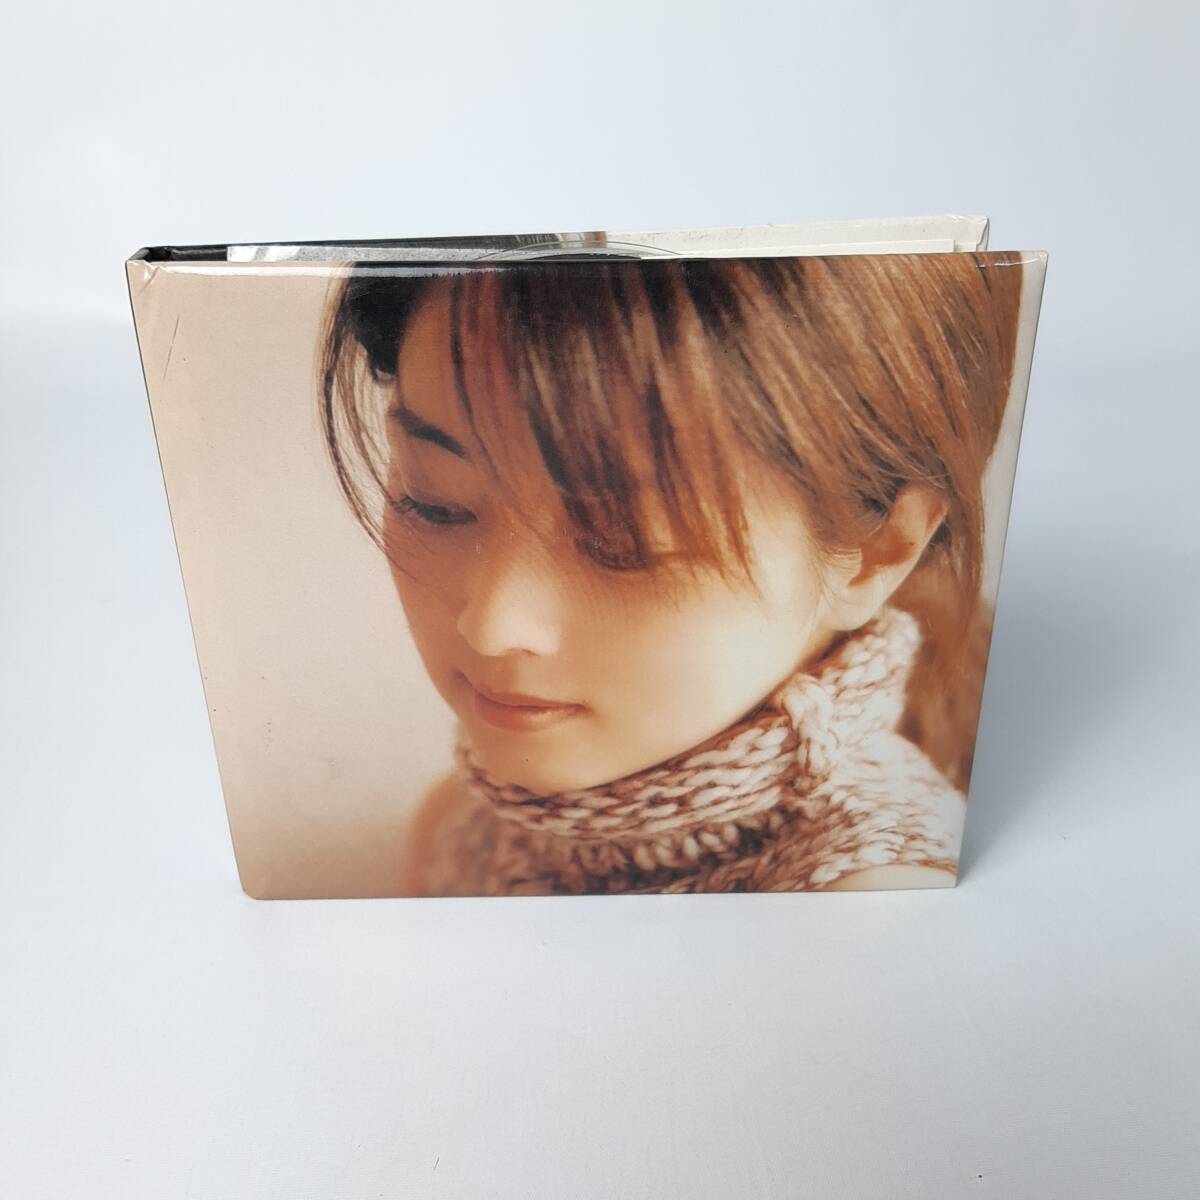 ZARD slope . Izumi water album stop ..... clock . now movement . did book style package 